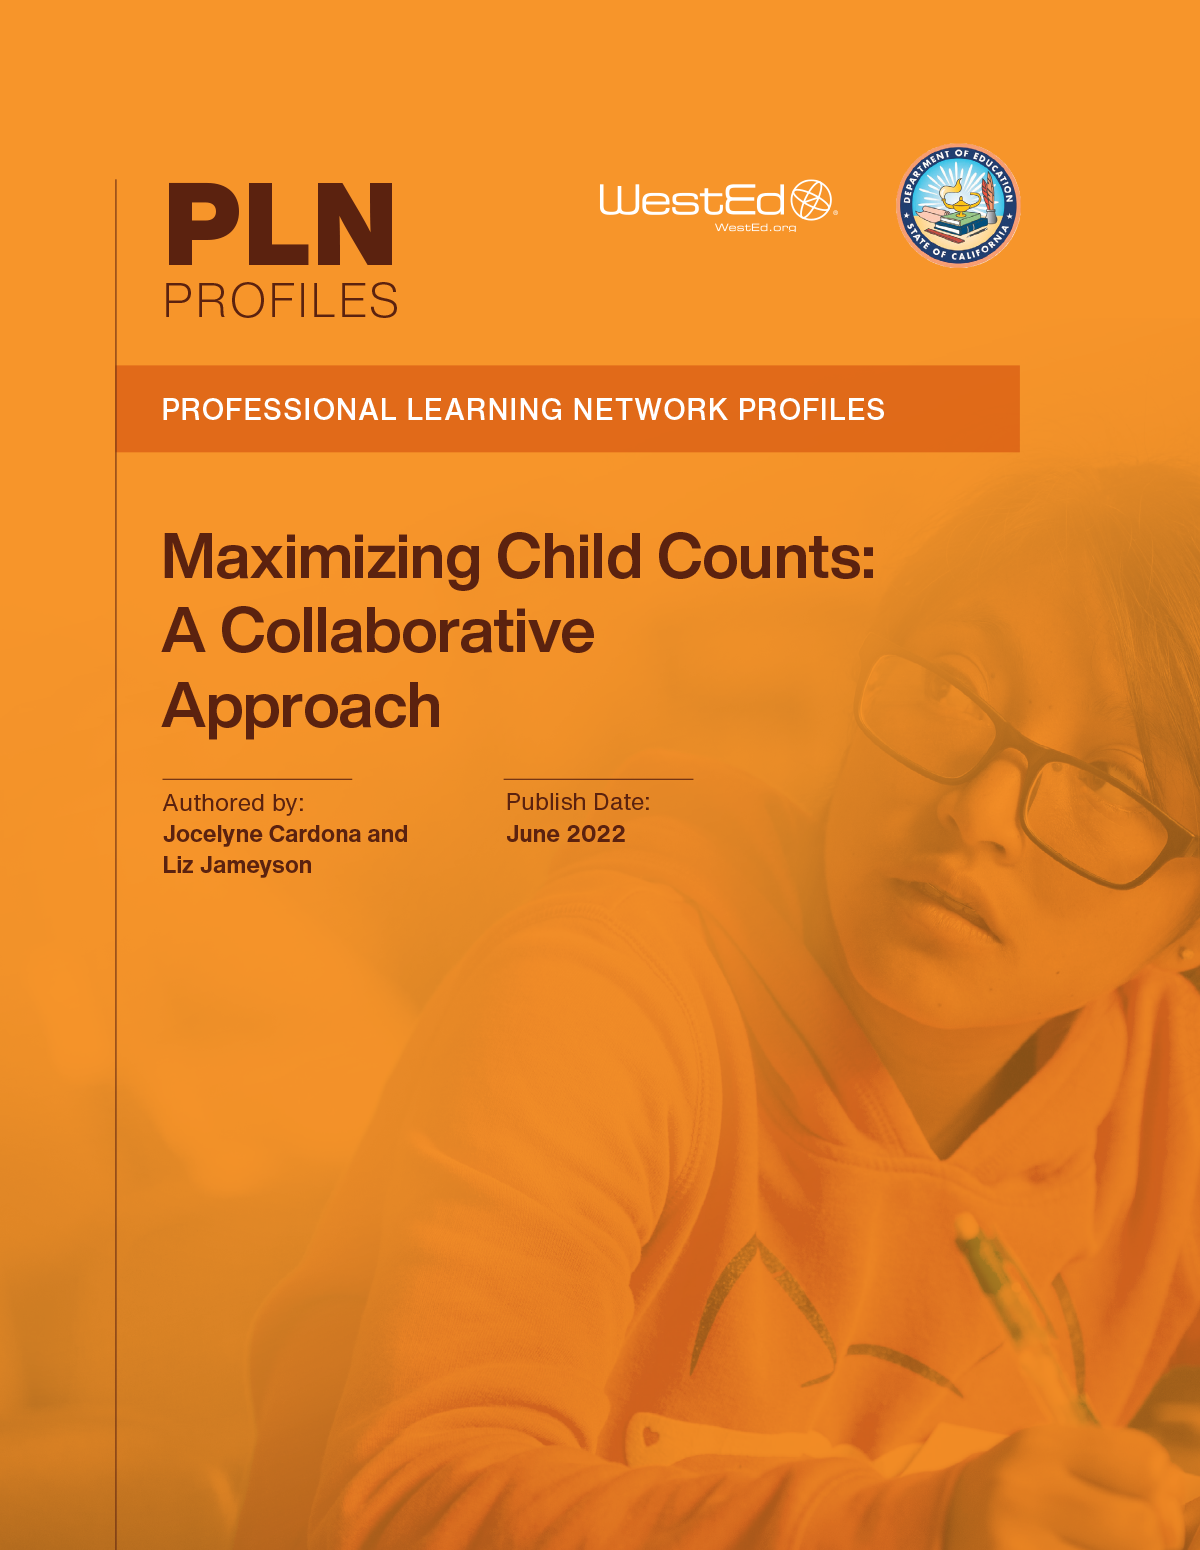 Maximizing Child Counts: A Collaborative Approach